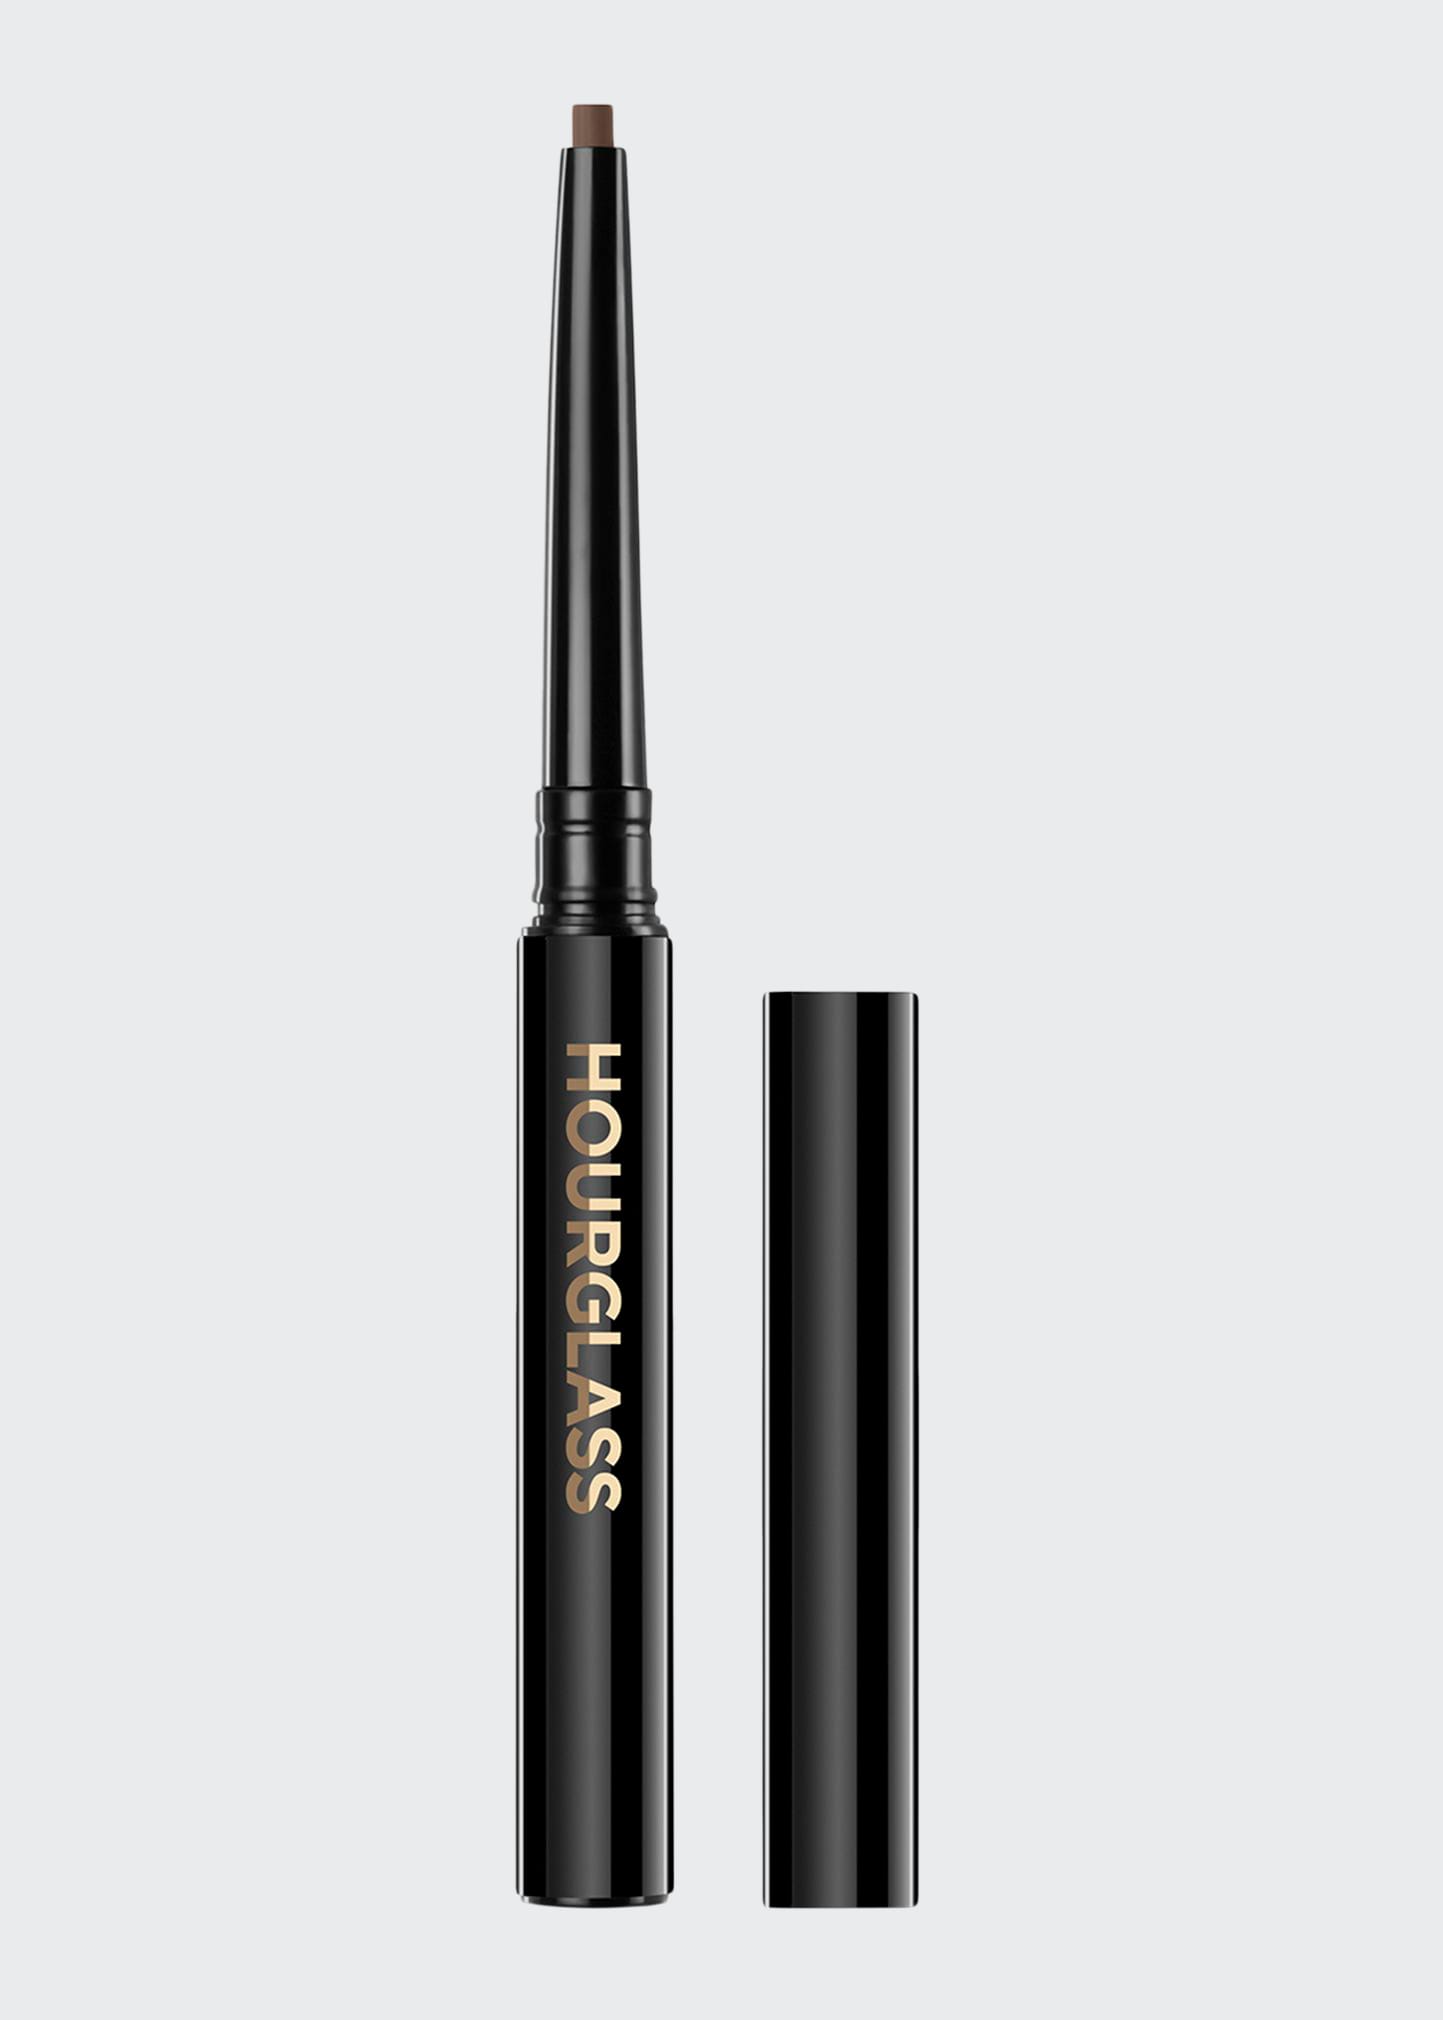 Hourglass Arch Brow Micro Sculpting Pencil, Travel Size In Soft Brunette